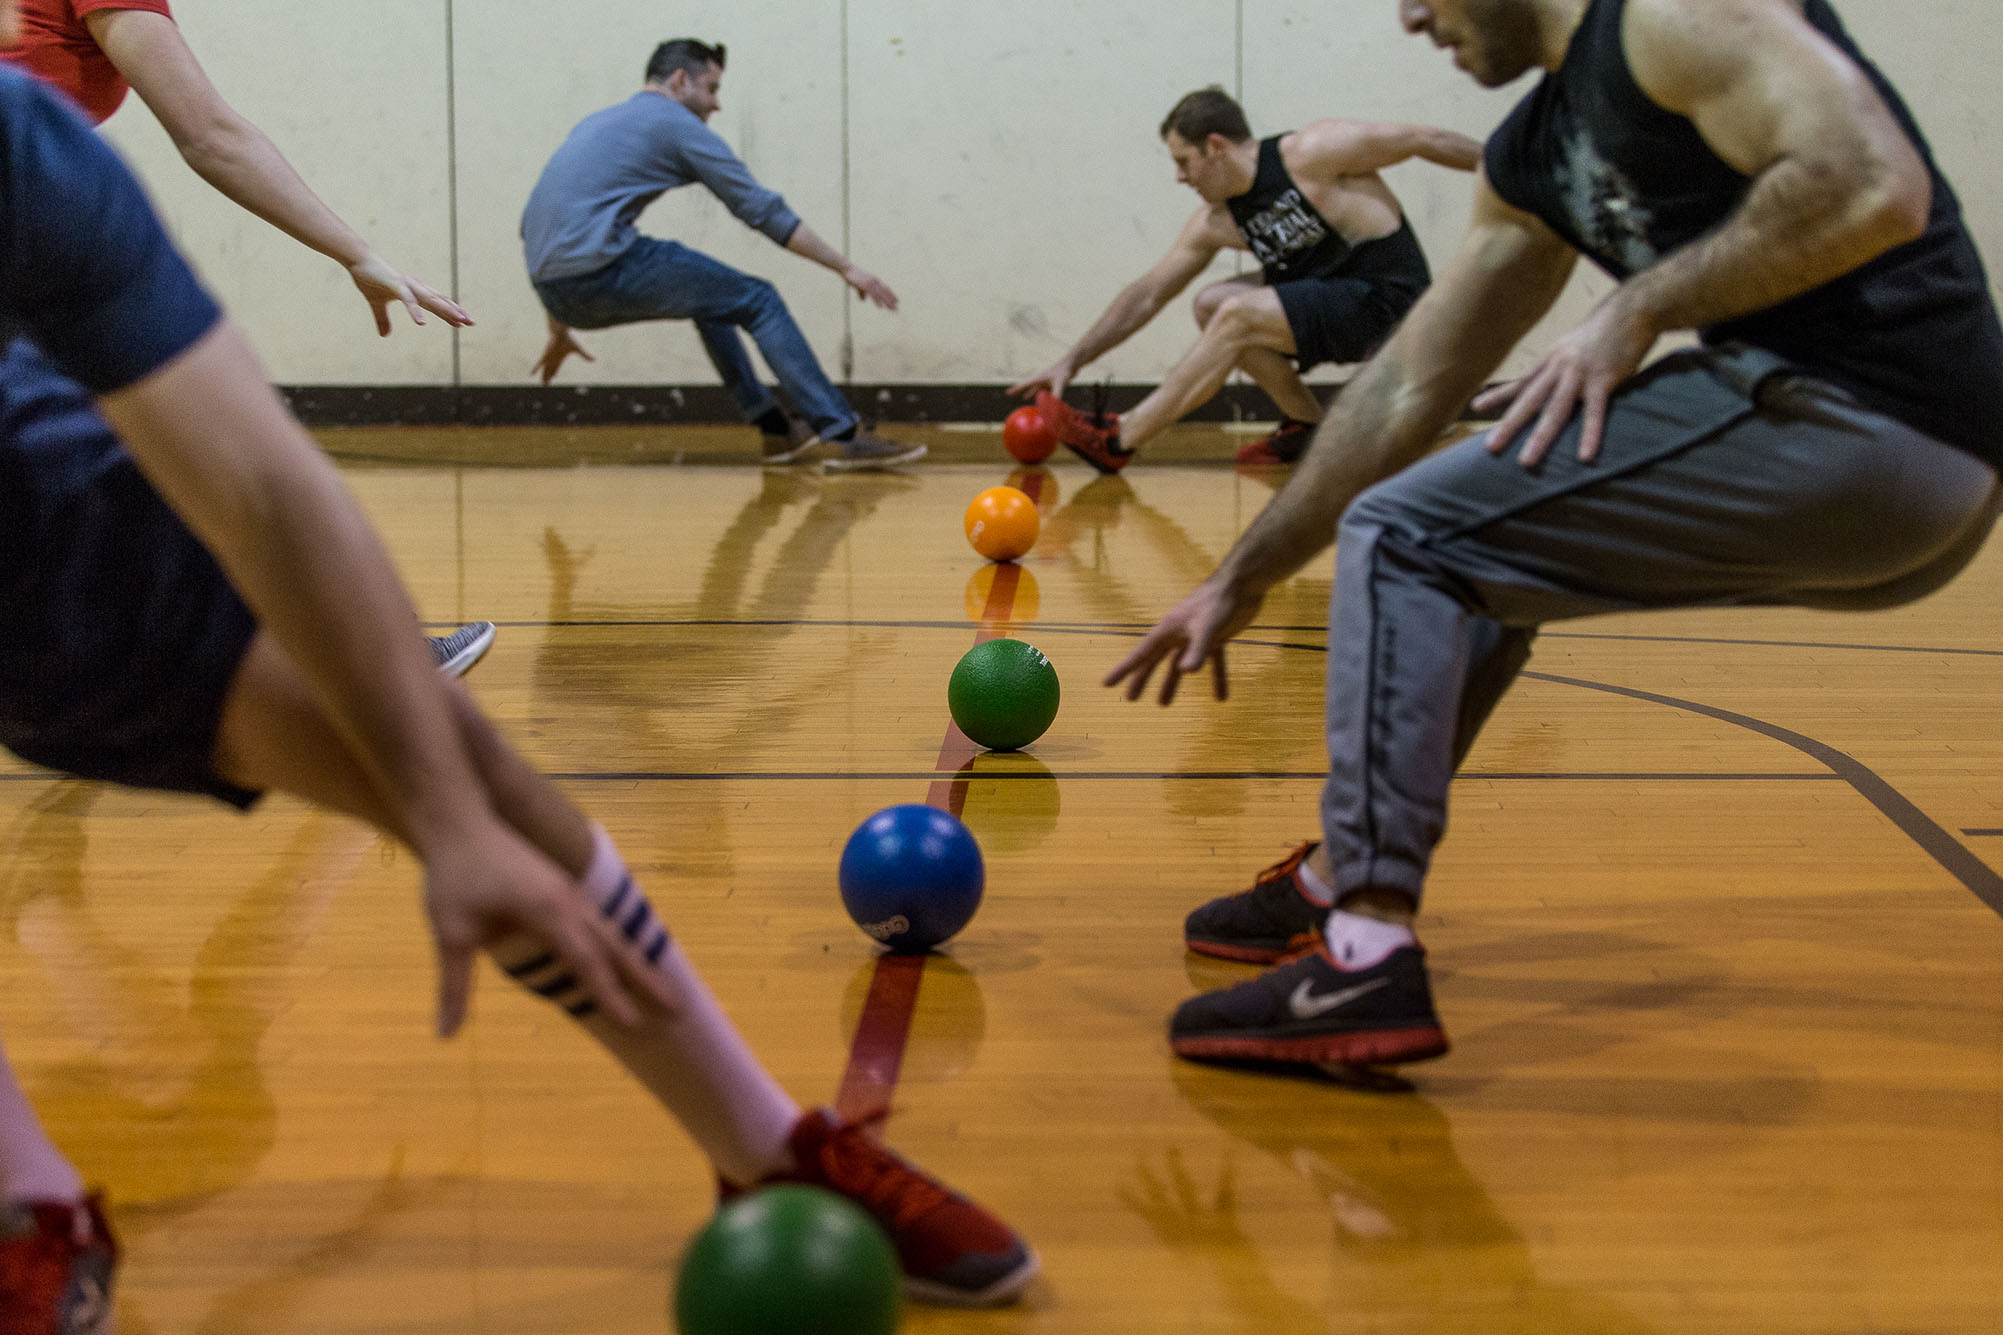 Photo: In a gymnasium, dodge balls line the court and players lunge to grab them.